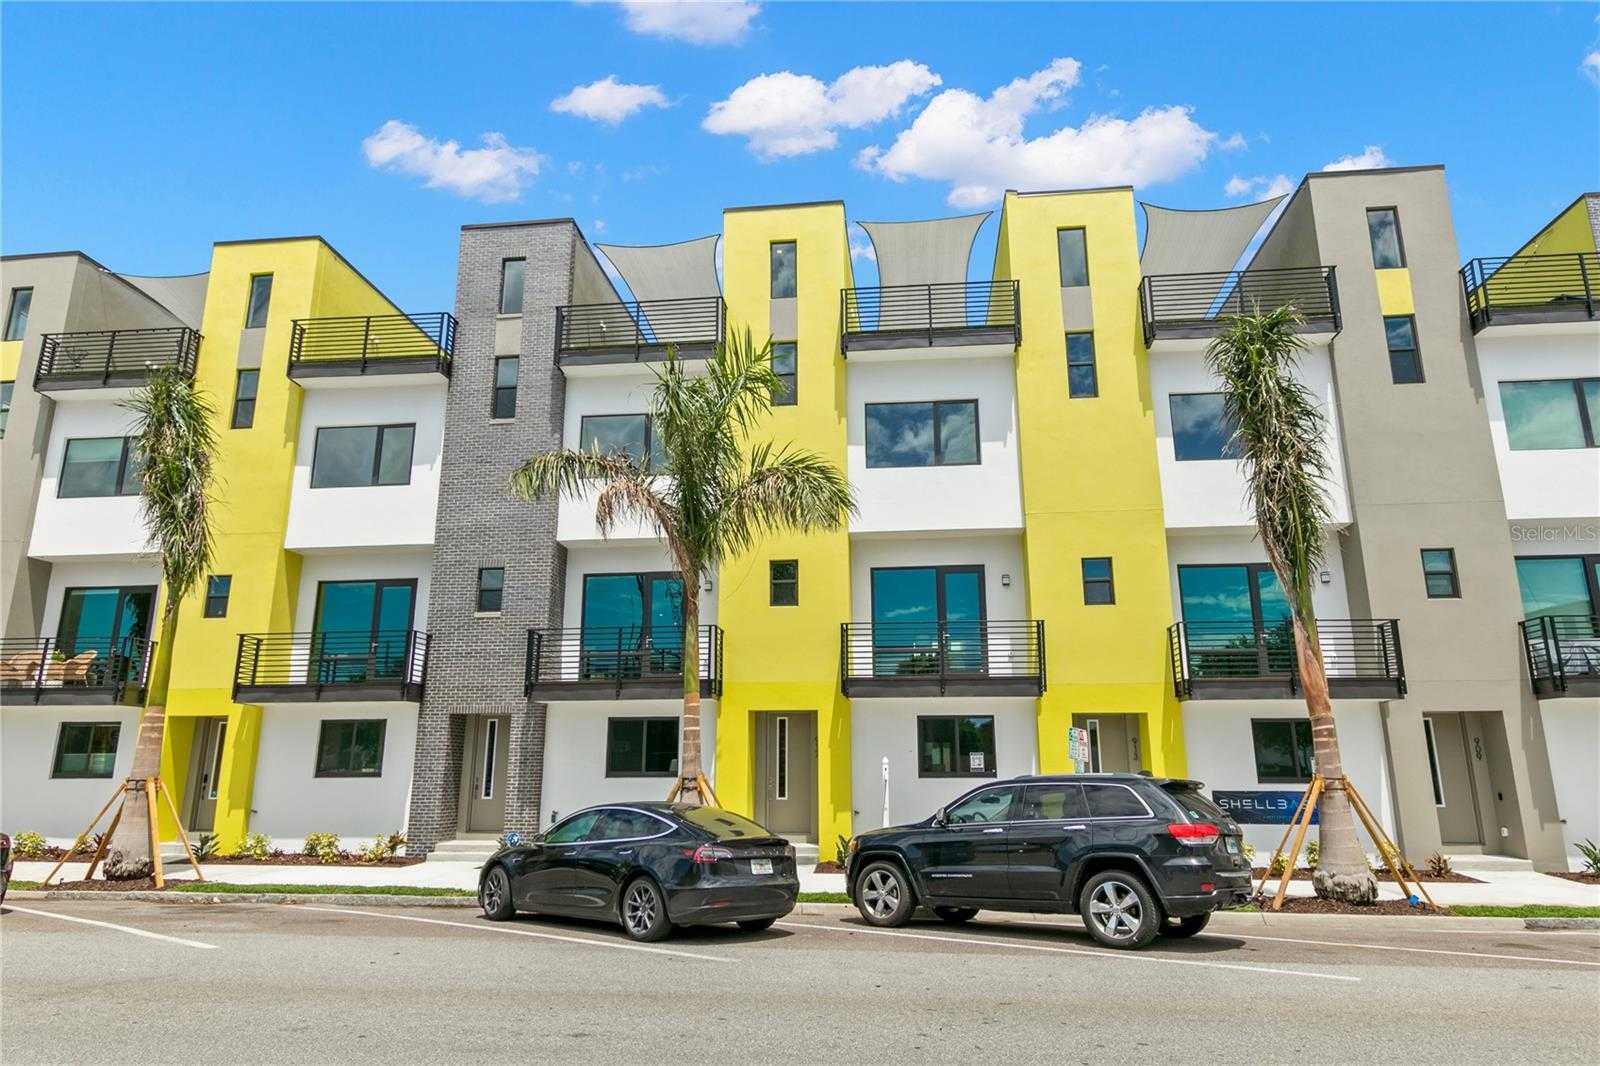 $1,025,000 - 3Br/4Ba -  for Sale in District On 9th Sub, St Petersburg